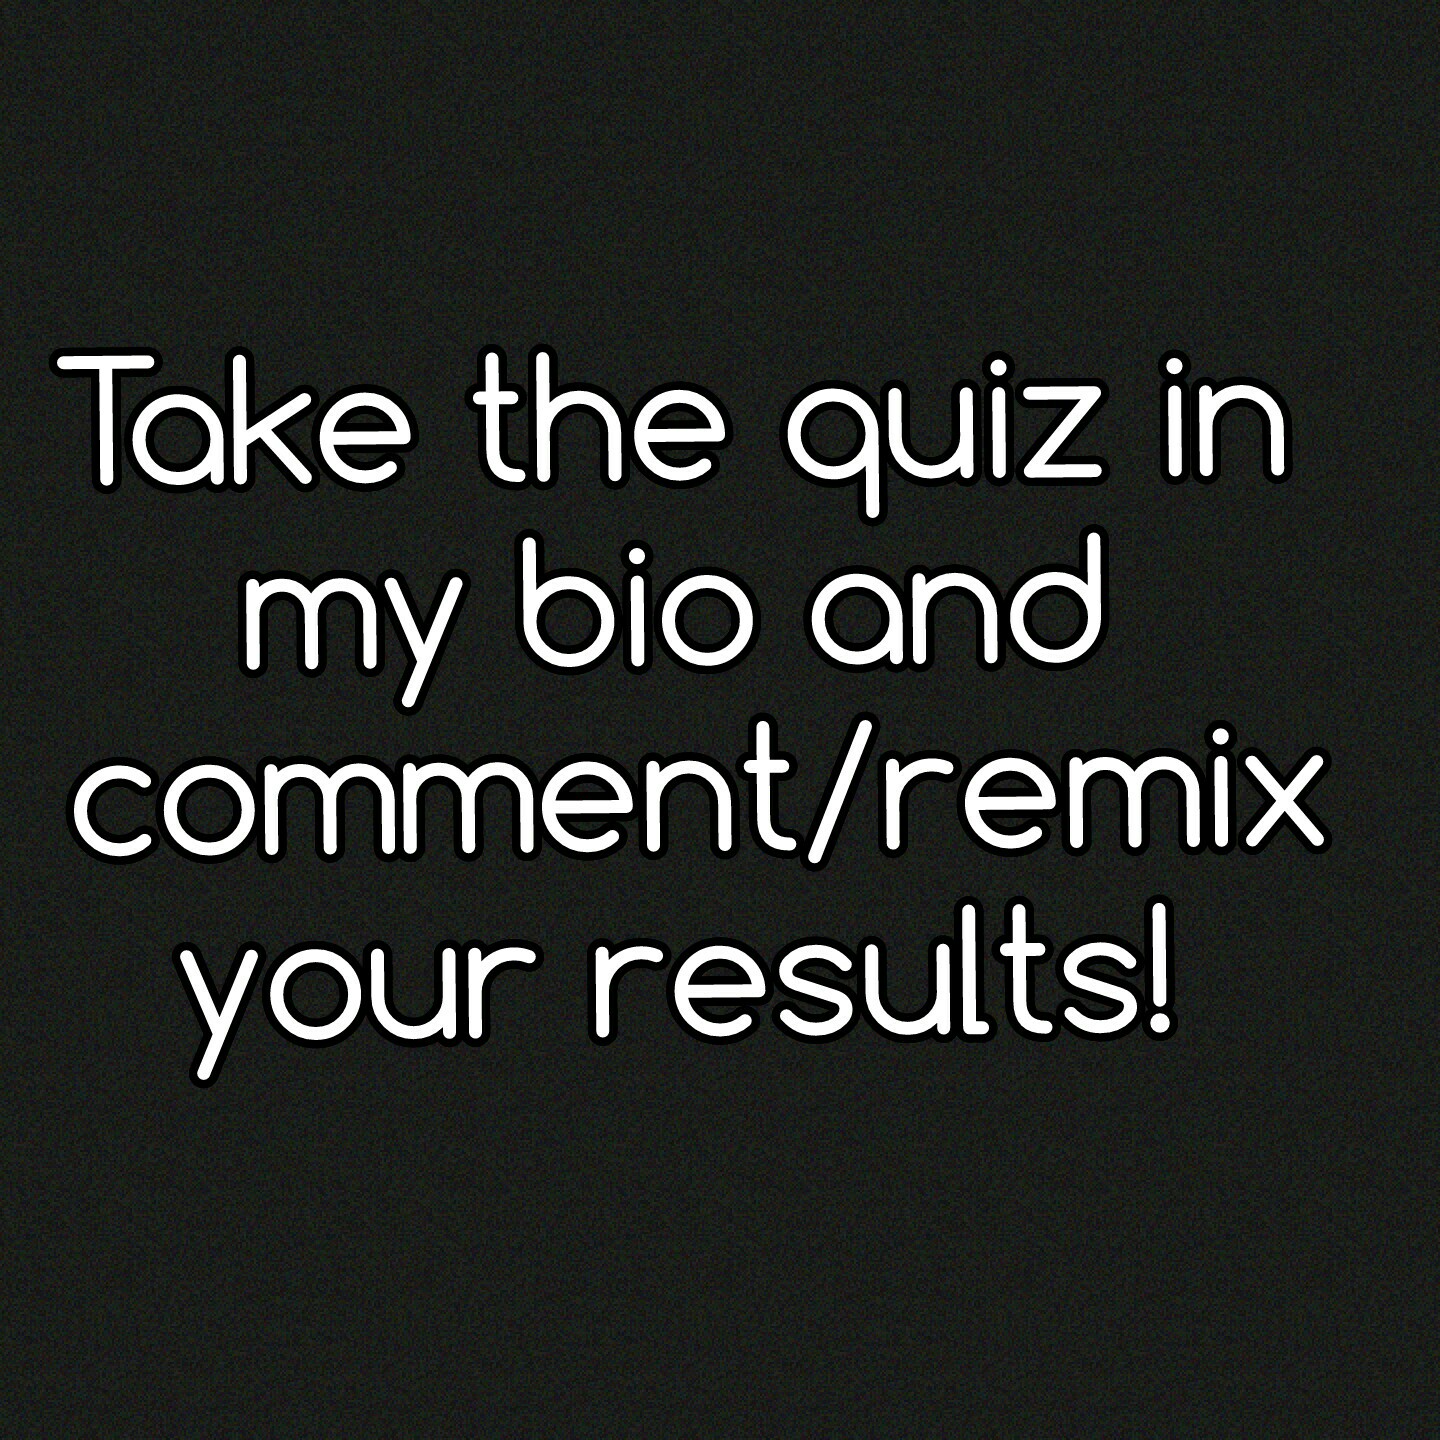 Take the quiz in my bio and comment/remix your results!